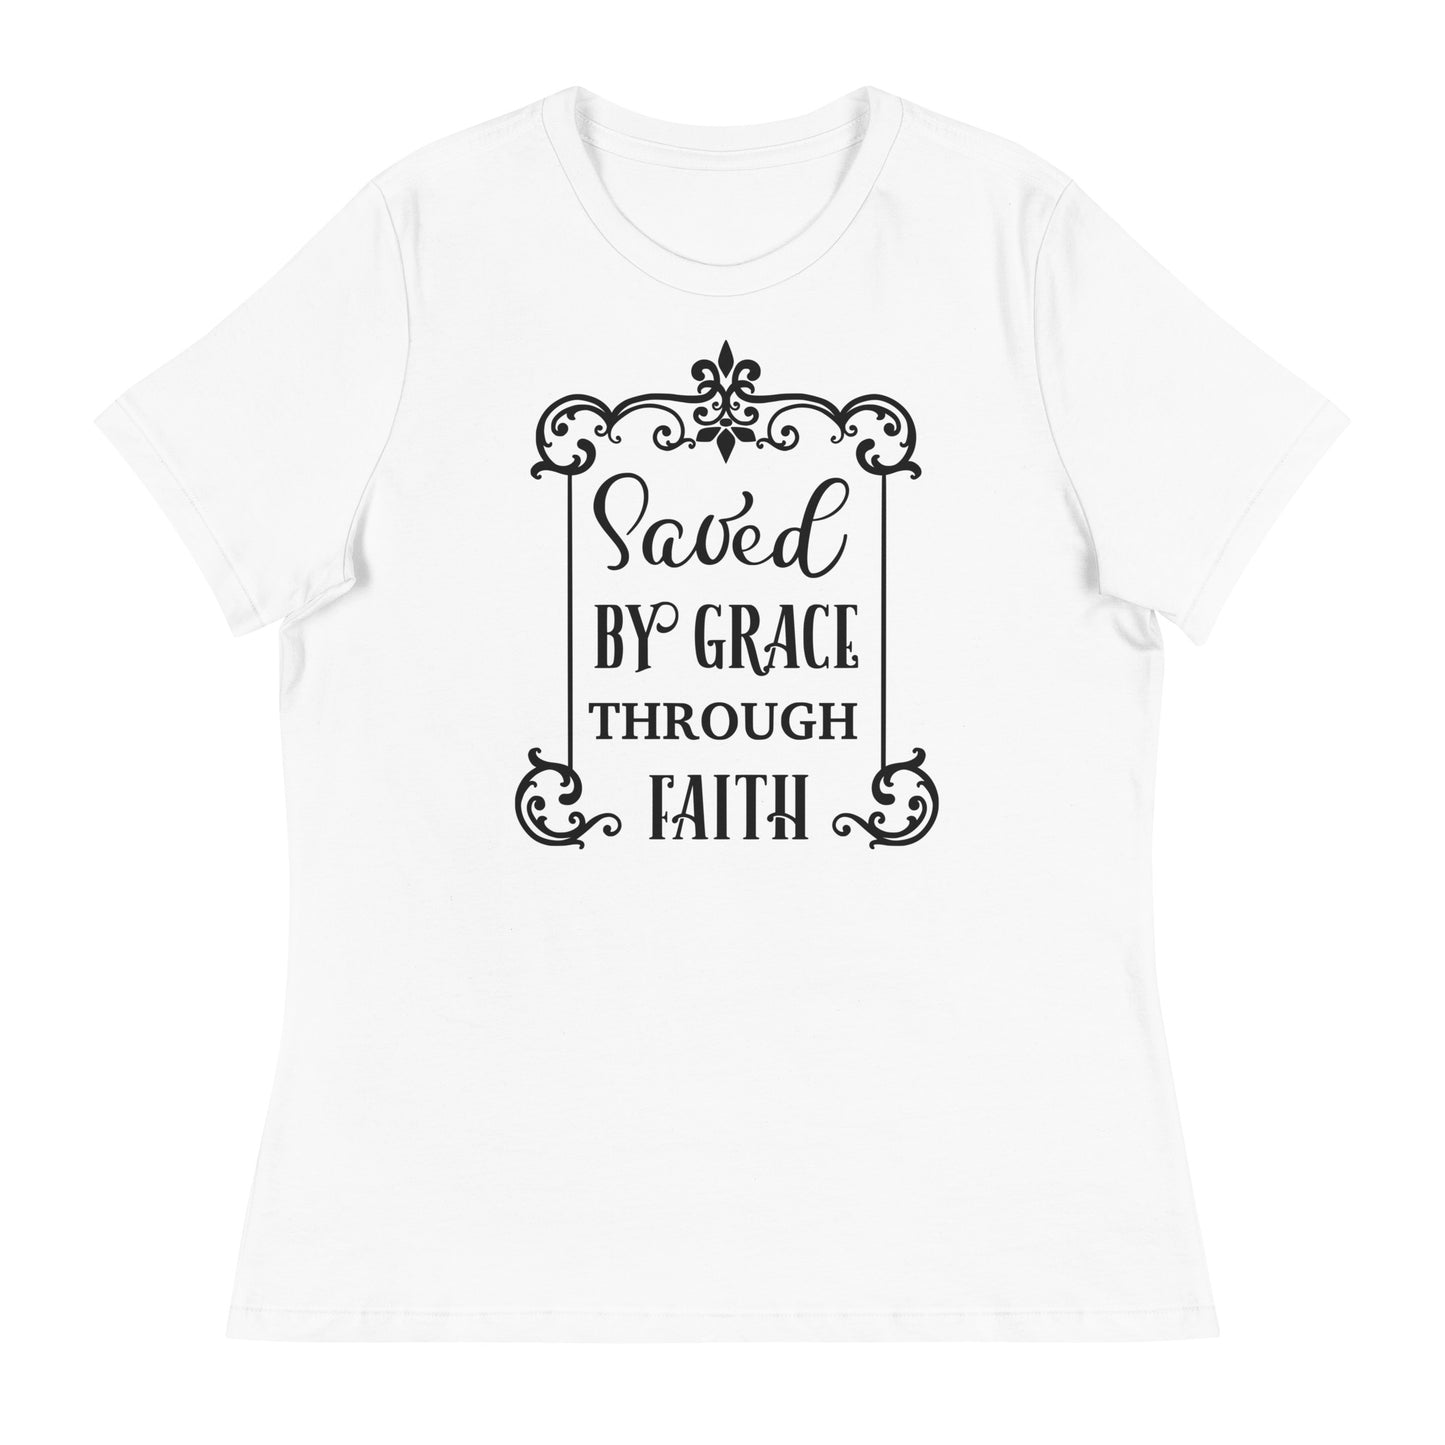 Saved by Grace through Faith Women's Relaxed T-Shirt